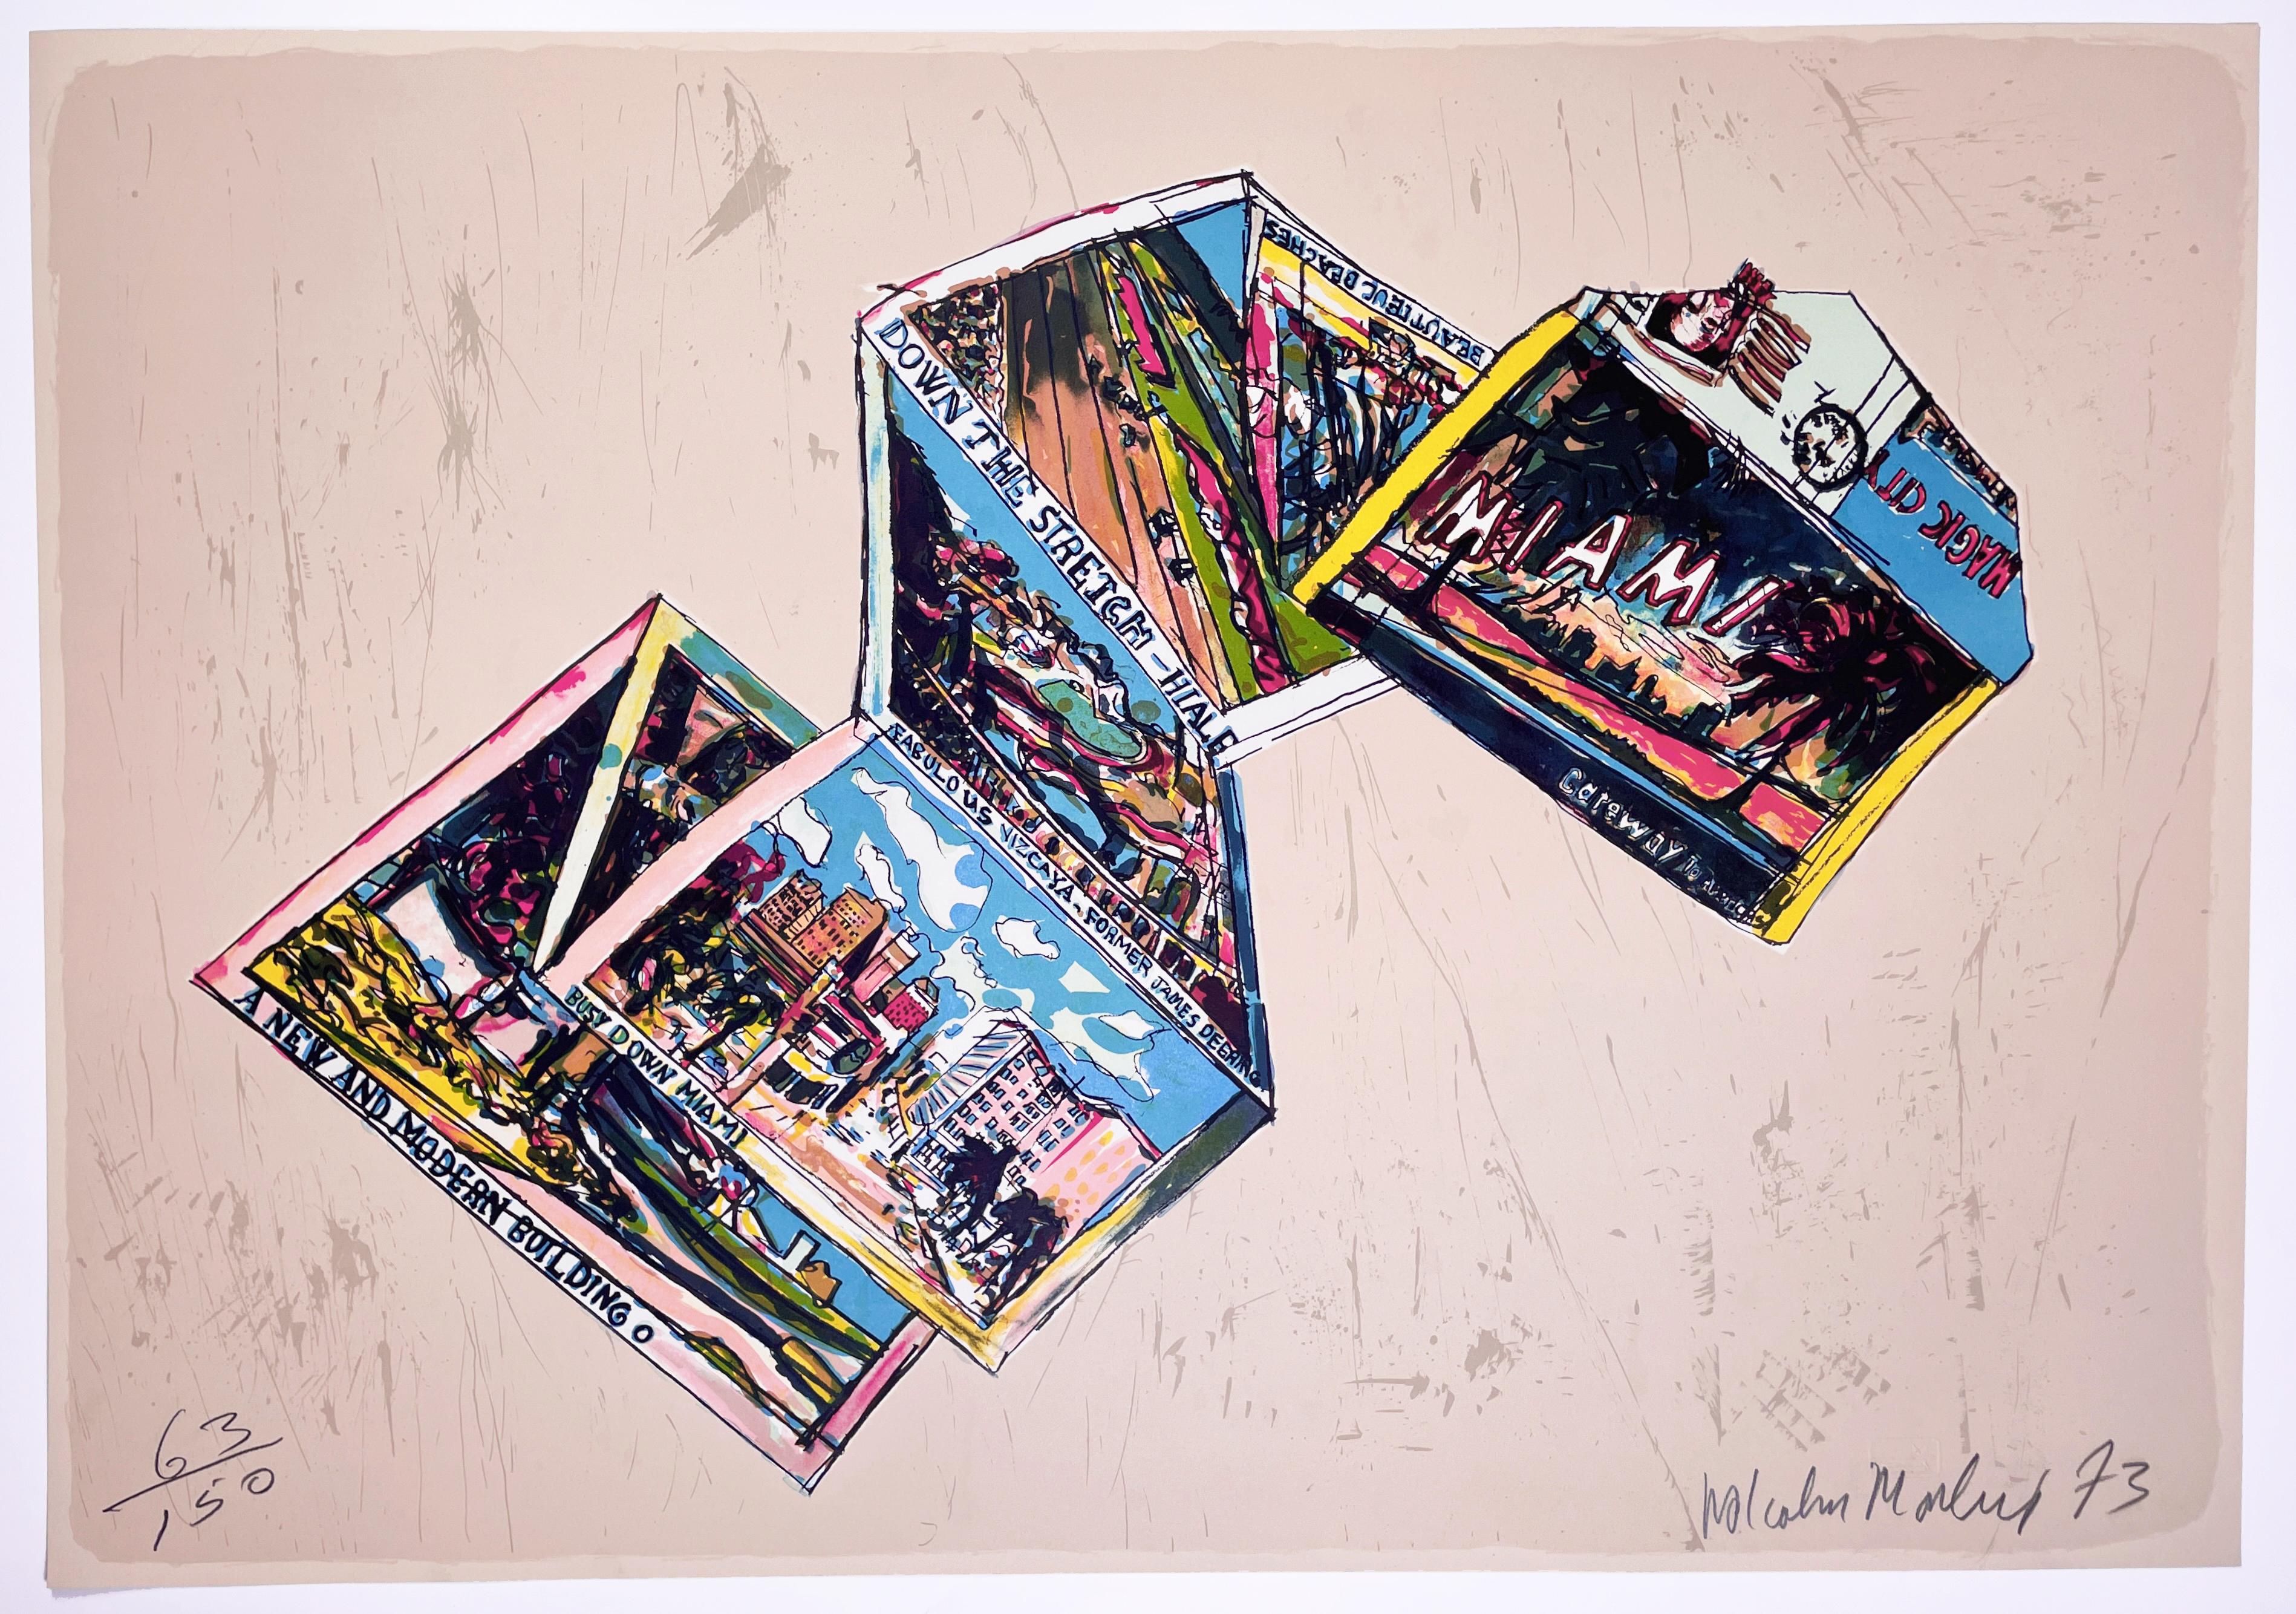 These colorful, exuberant and expressionistic works depict a series of hand-drawn Miami beach and tourism postcards in various states of permutation and collapse, at times curling in on themselves and dissolving into glorious, saturated scribbles,